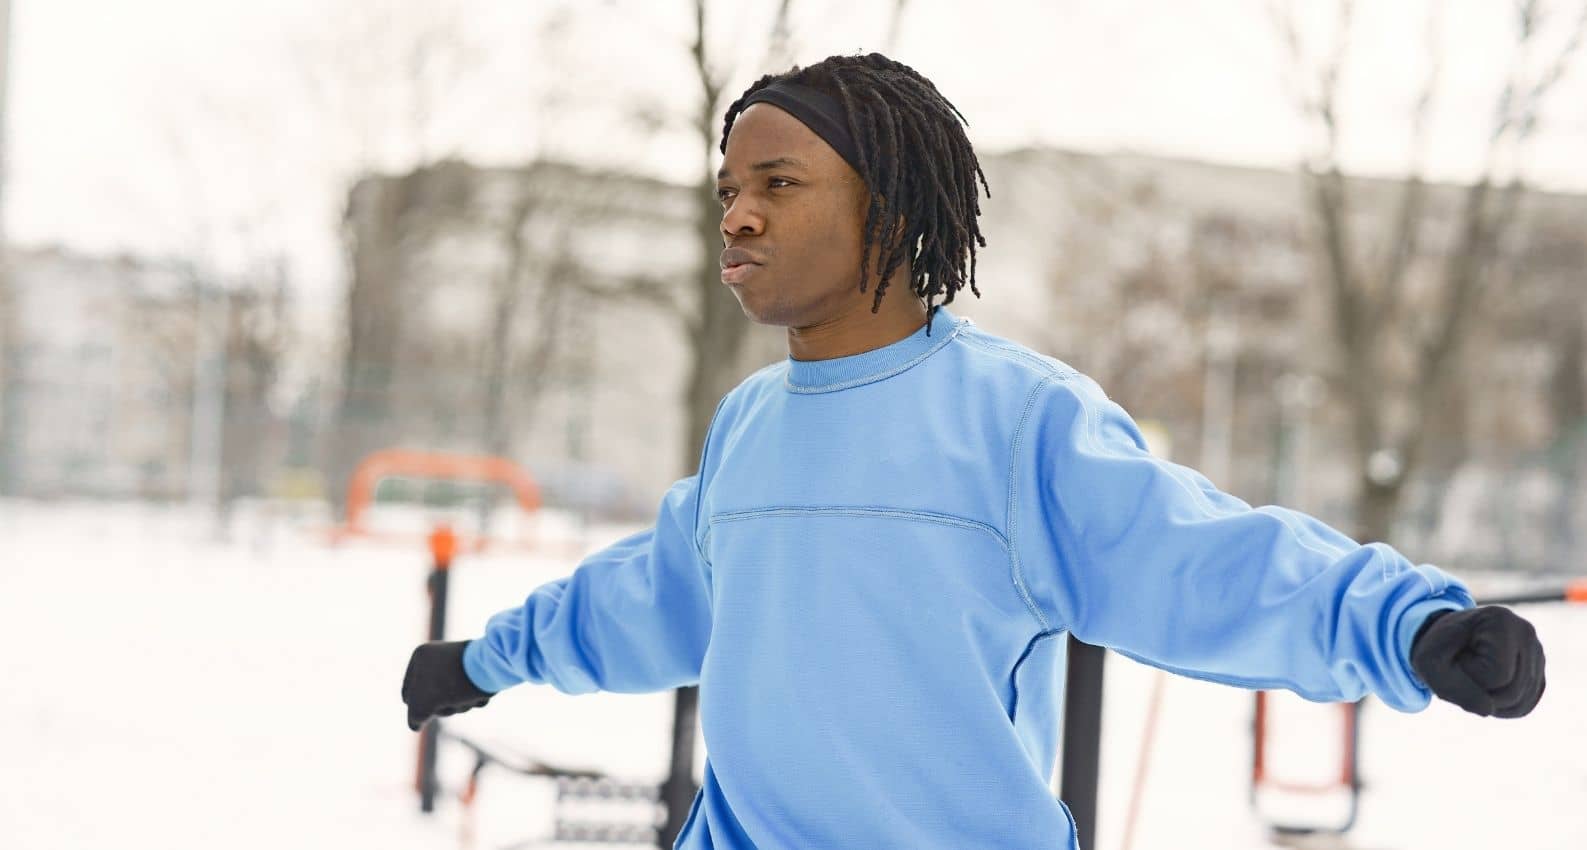 Top Tips For Staying Healthy & Motivated During The Cold Winter Months